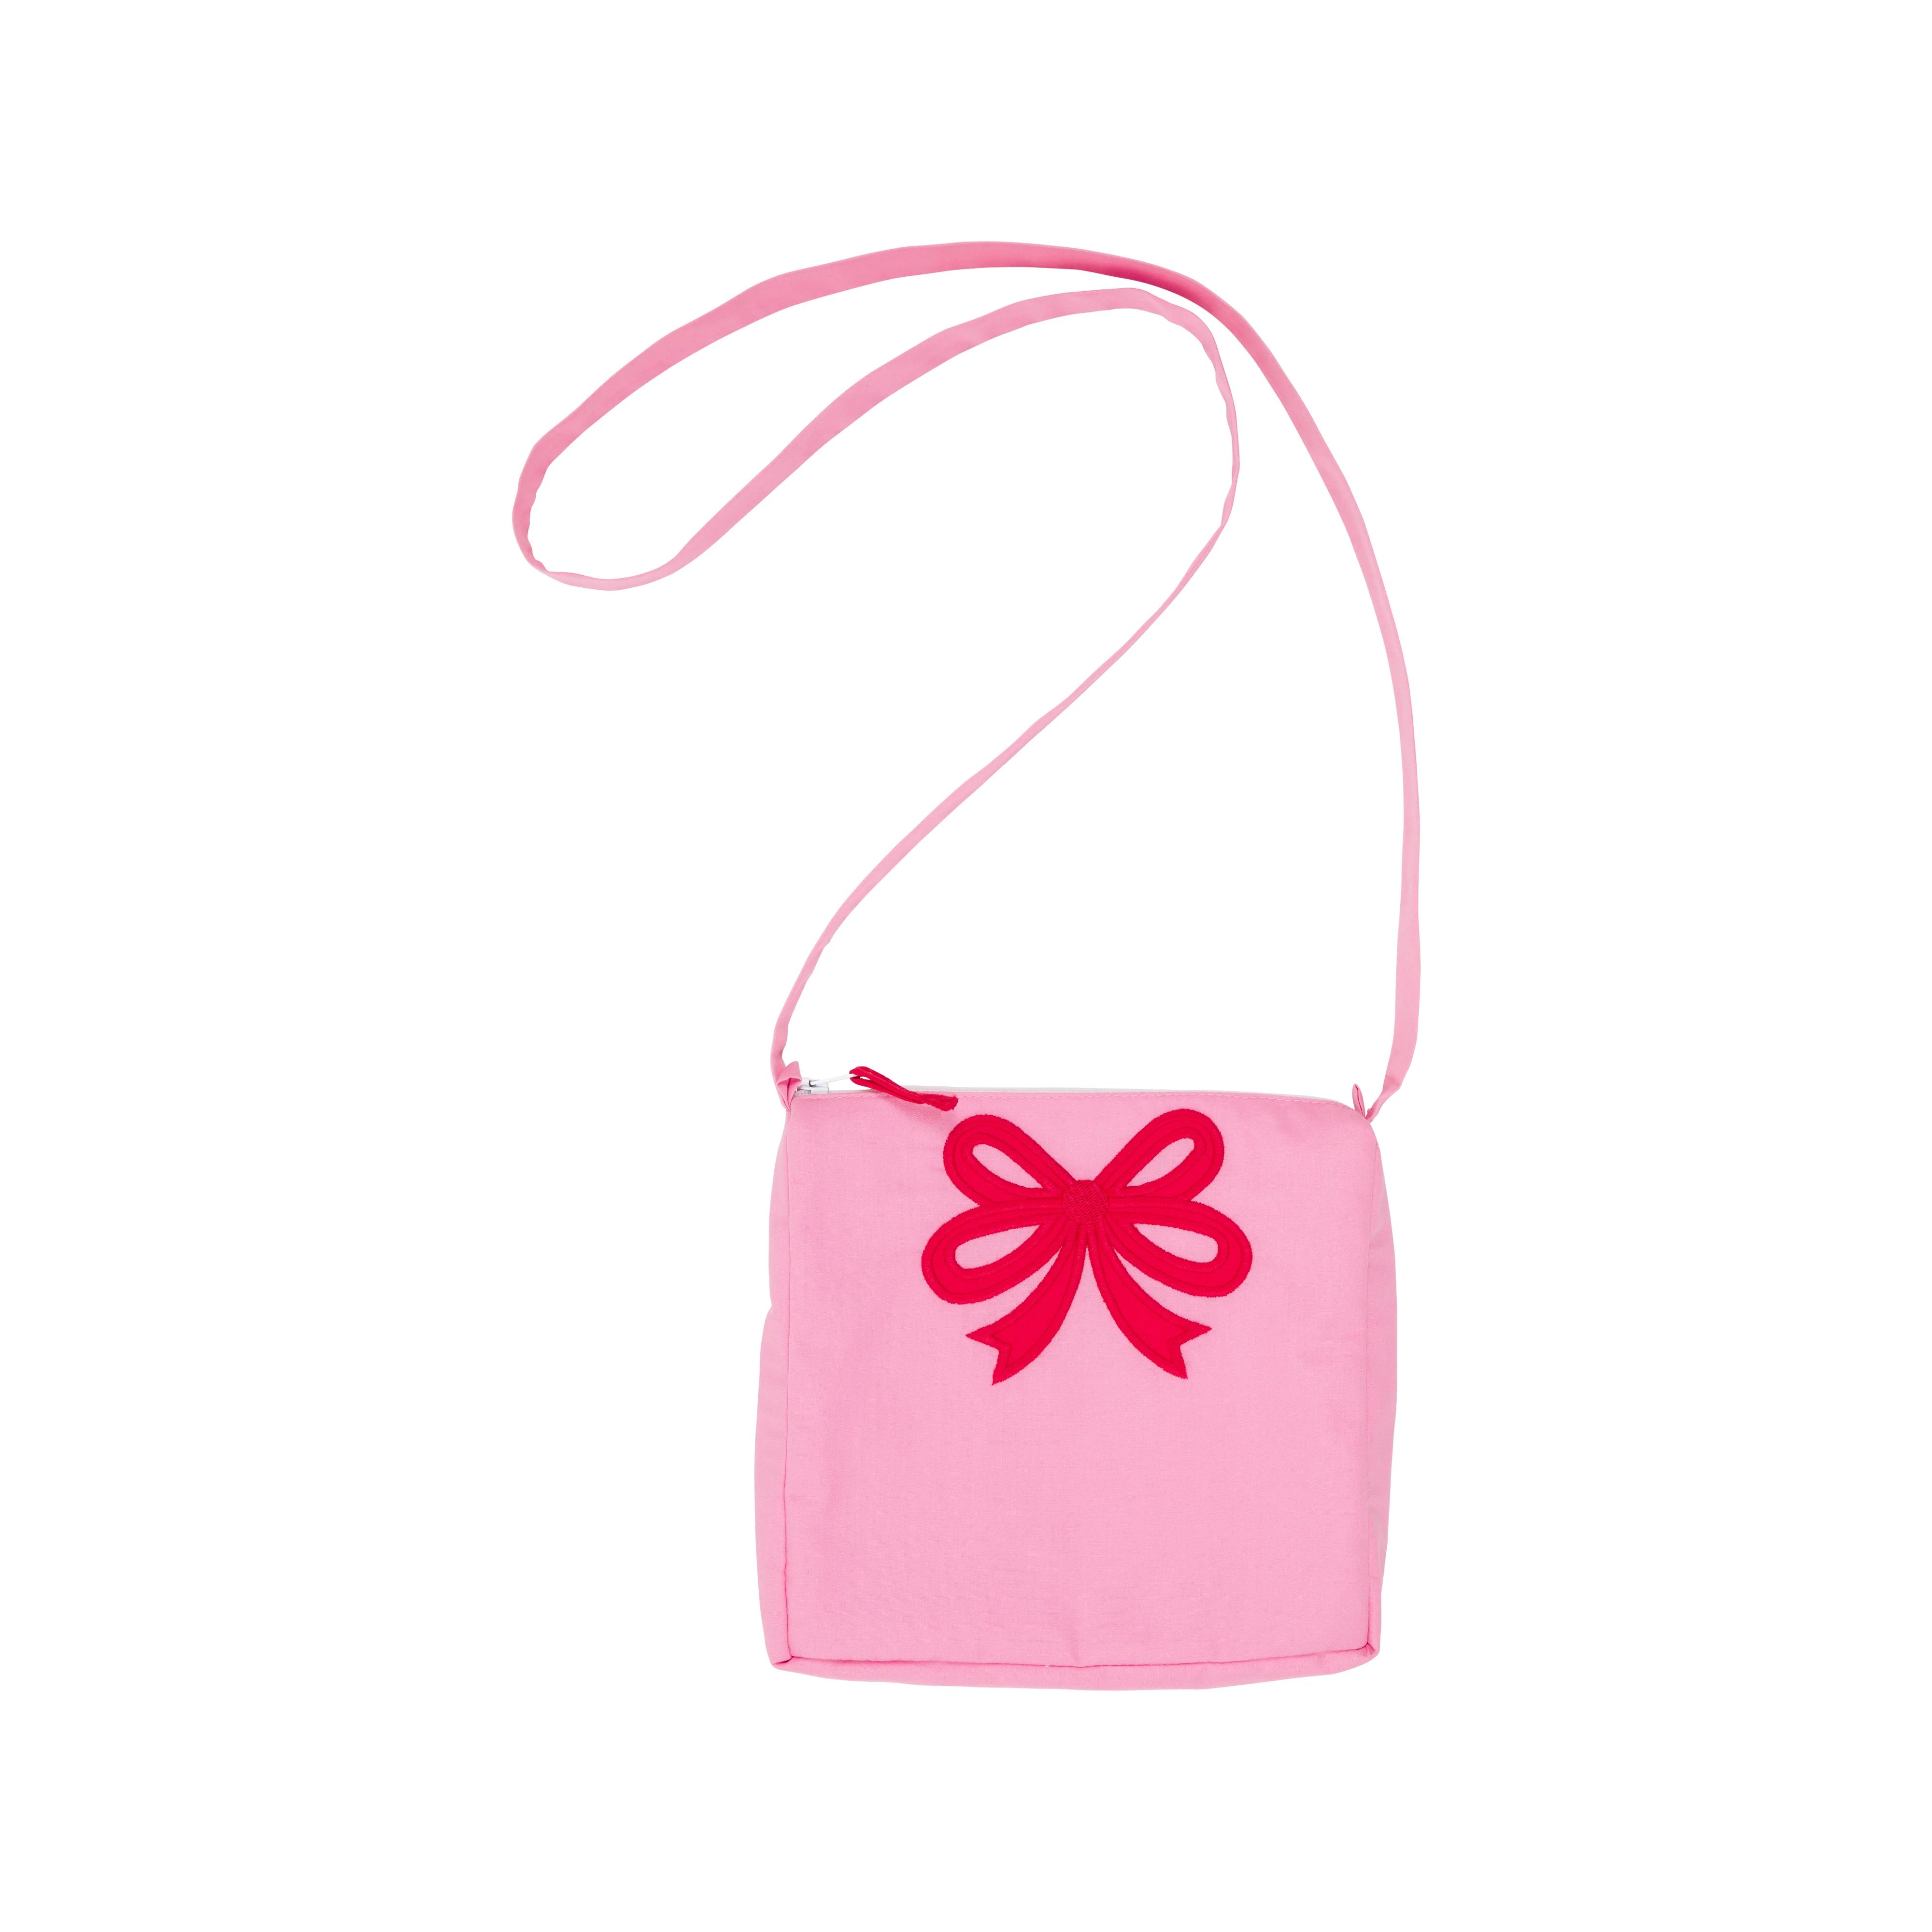 Save Your Pennies Purse - Hamptons Hot Pink with Richmond Red | The Beaufort Bonnet Company